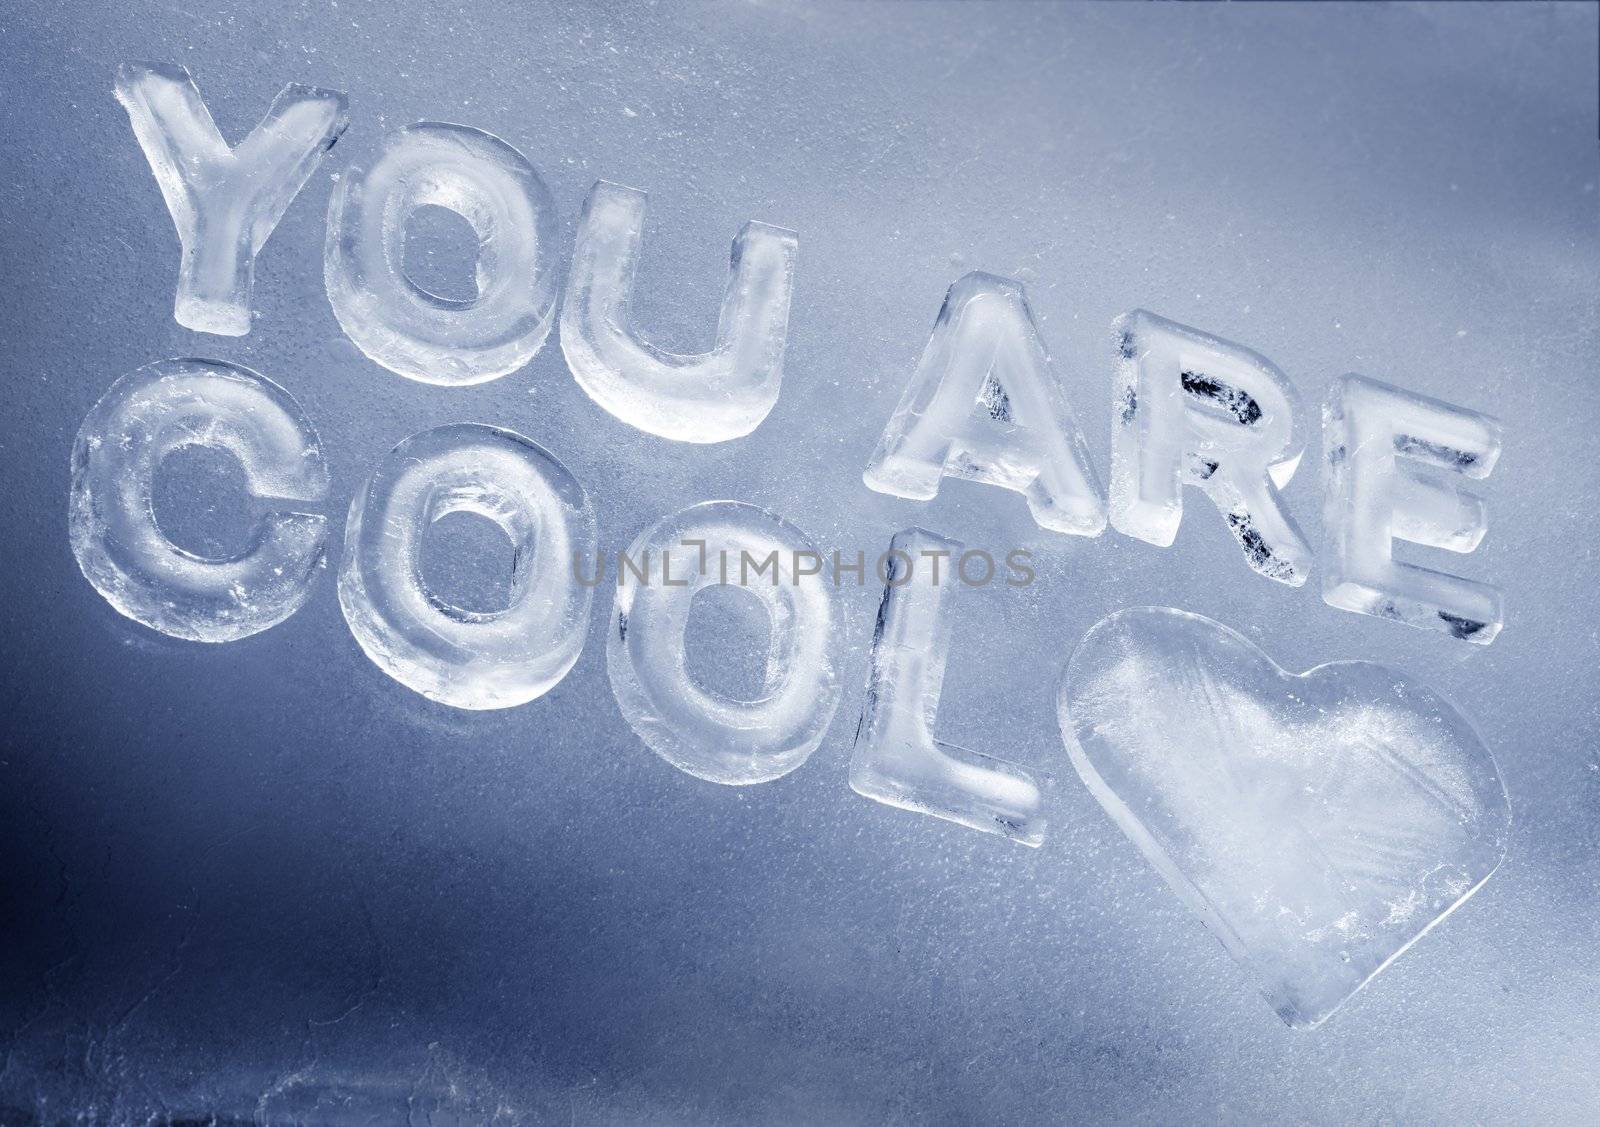 "You Are Cool" written with real ice letters.